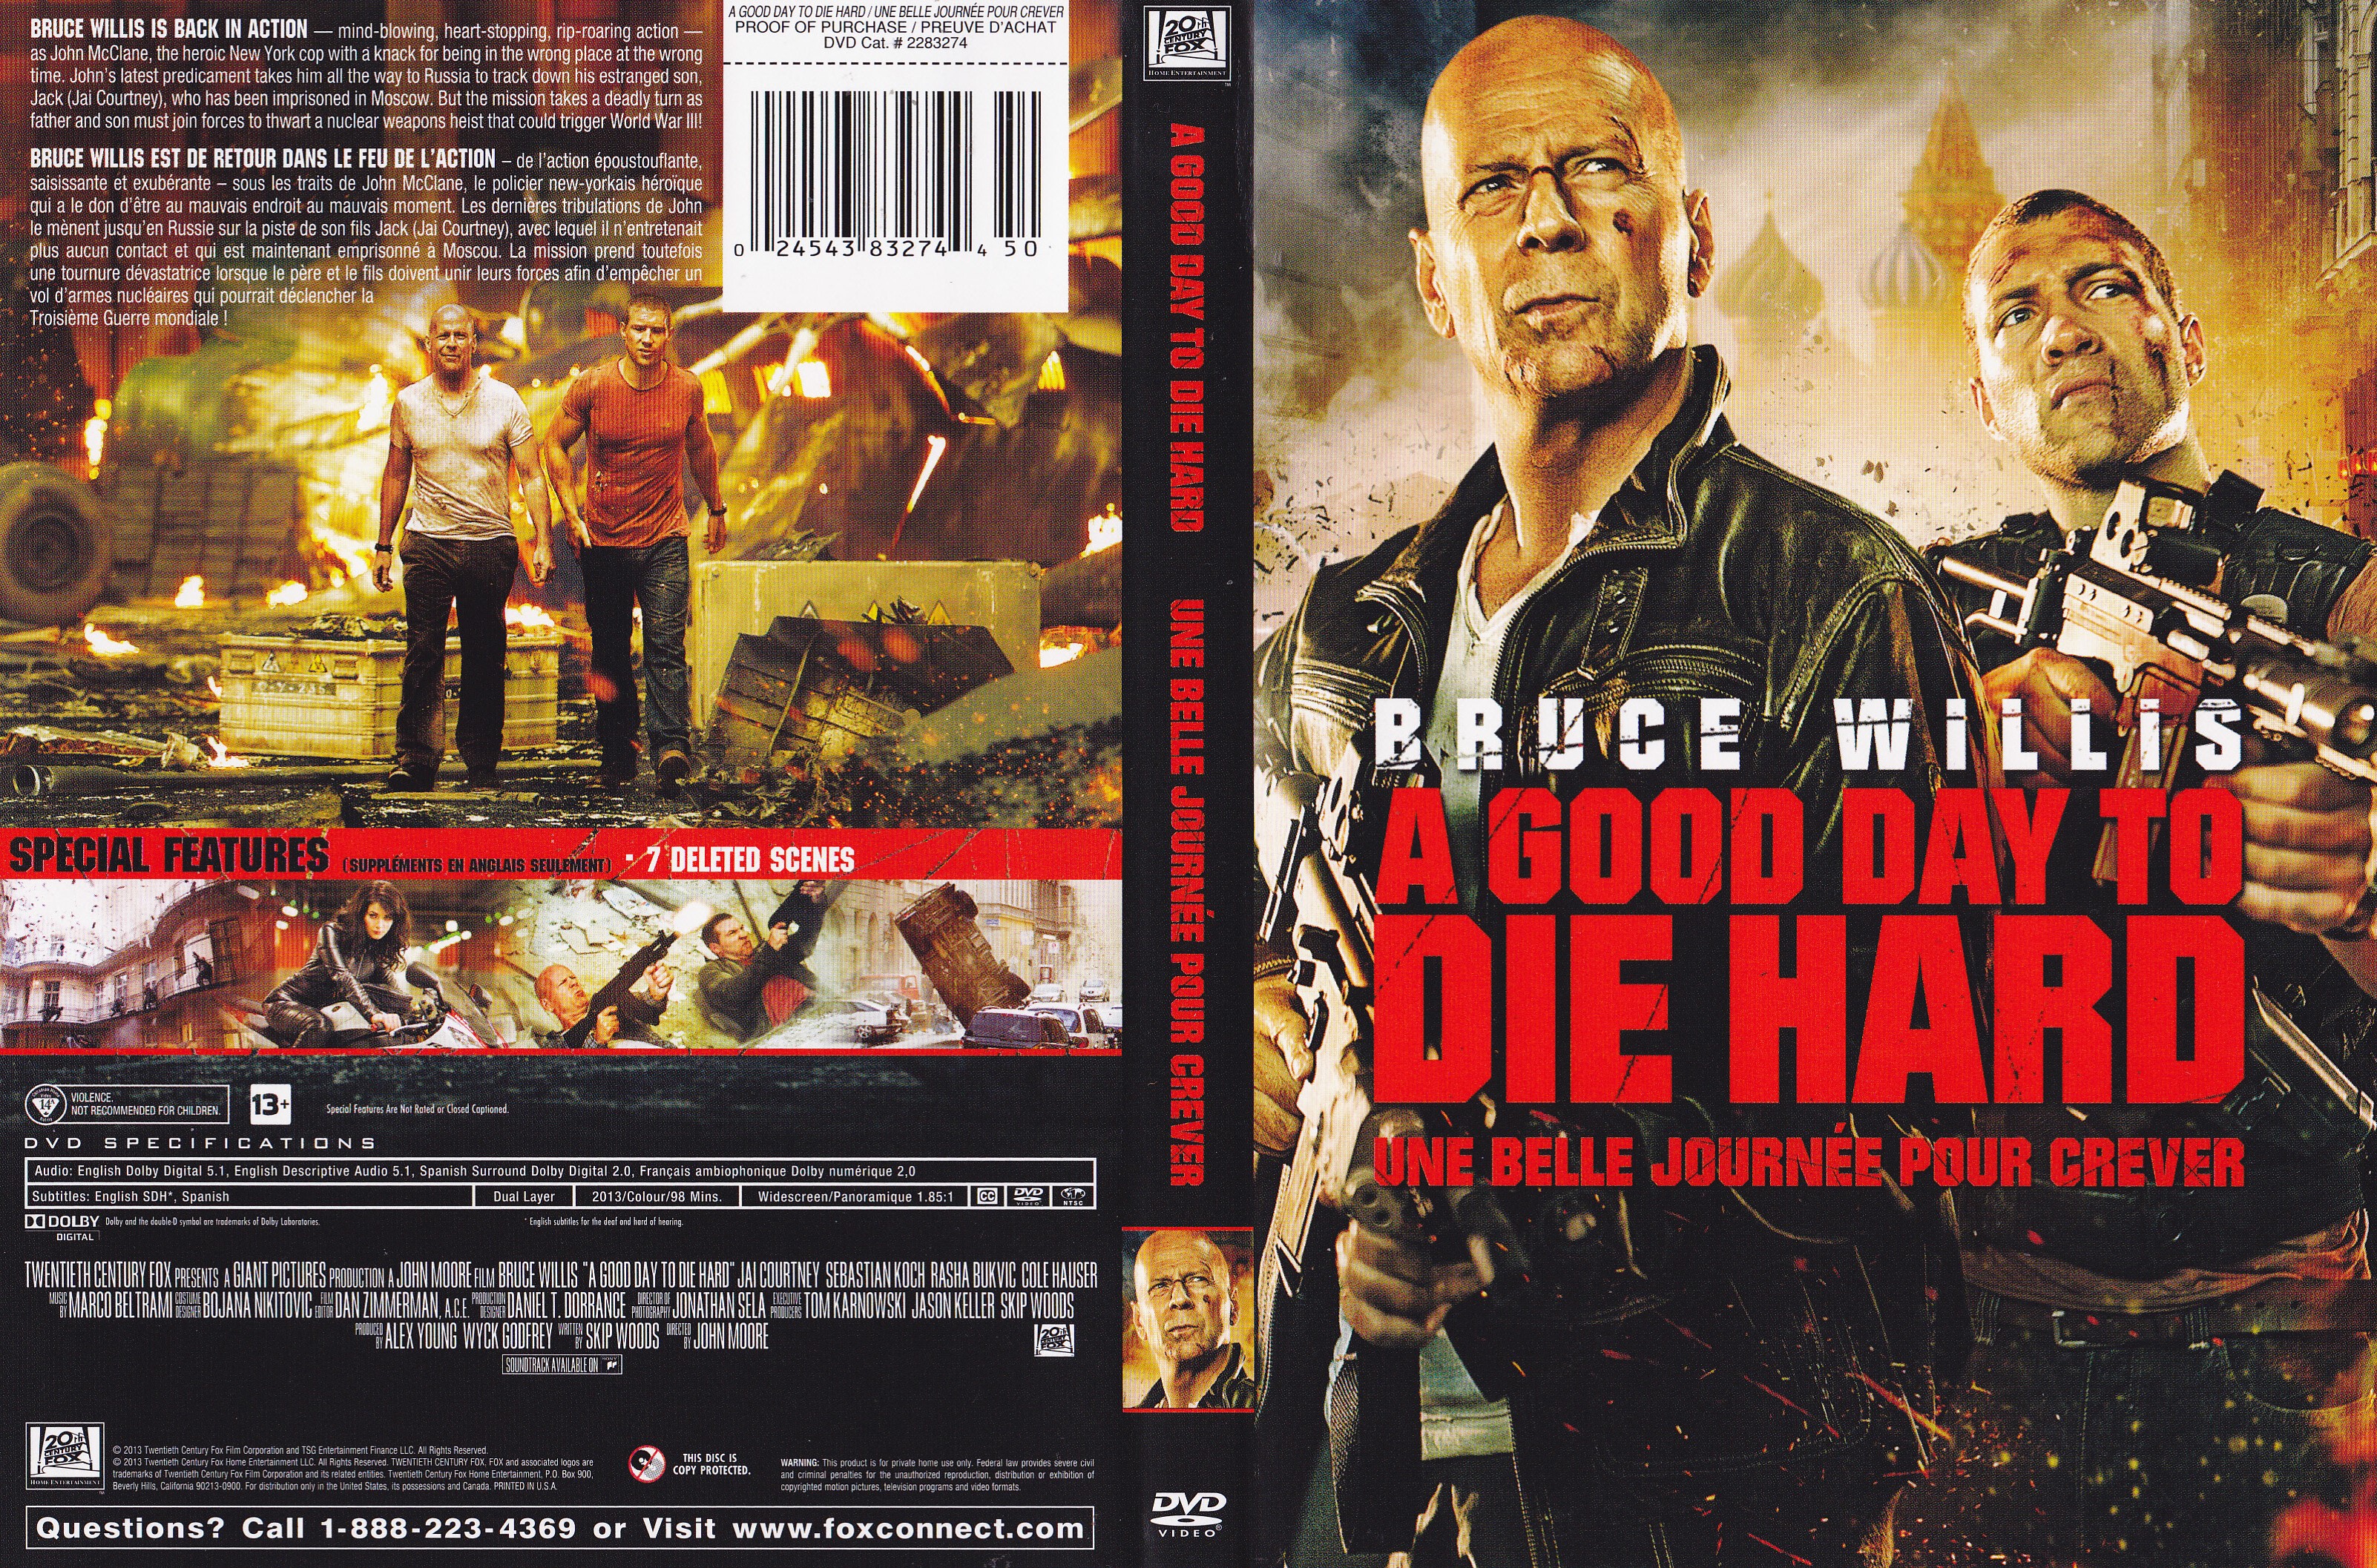 Jaquette DVD A Good Day To Die Hard - Die Hard Une Belle journe pour crever (Canadienne)